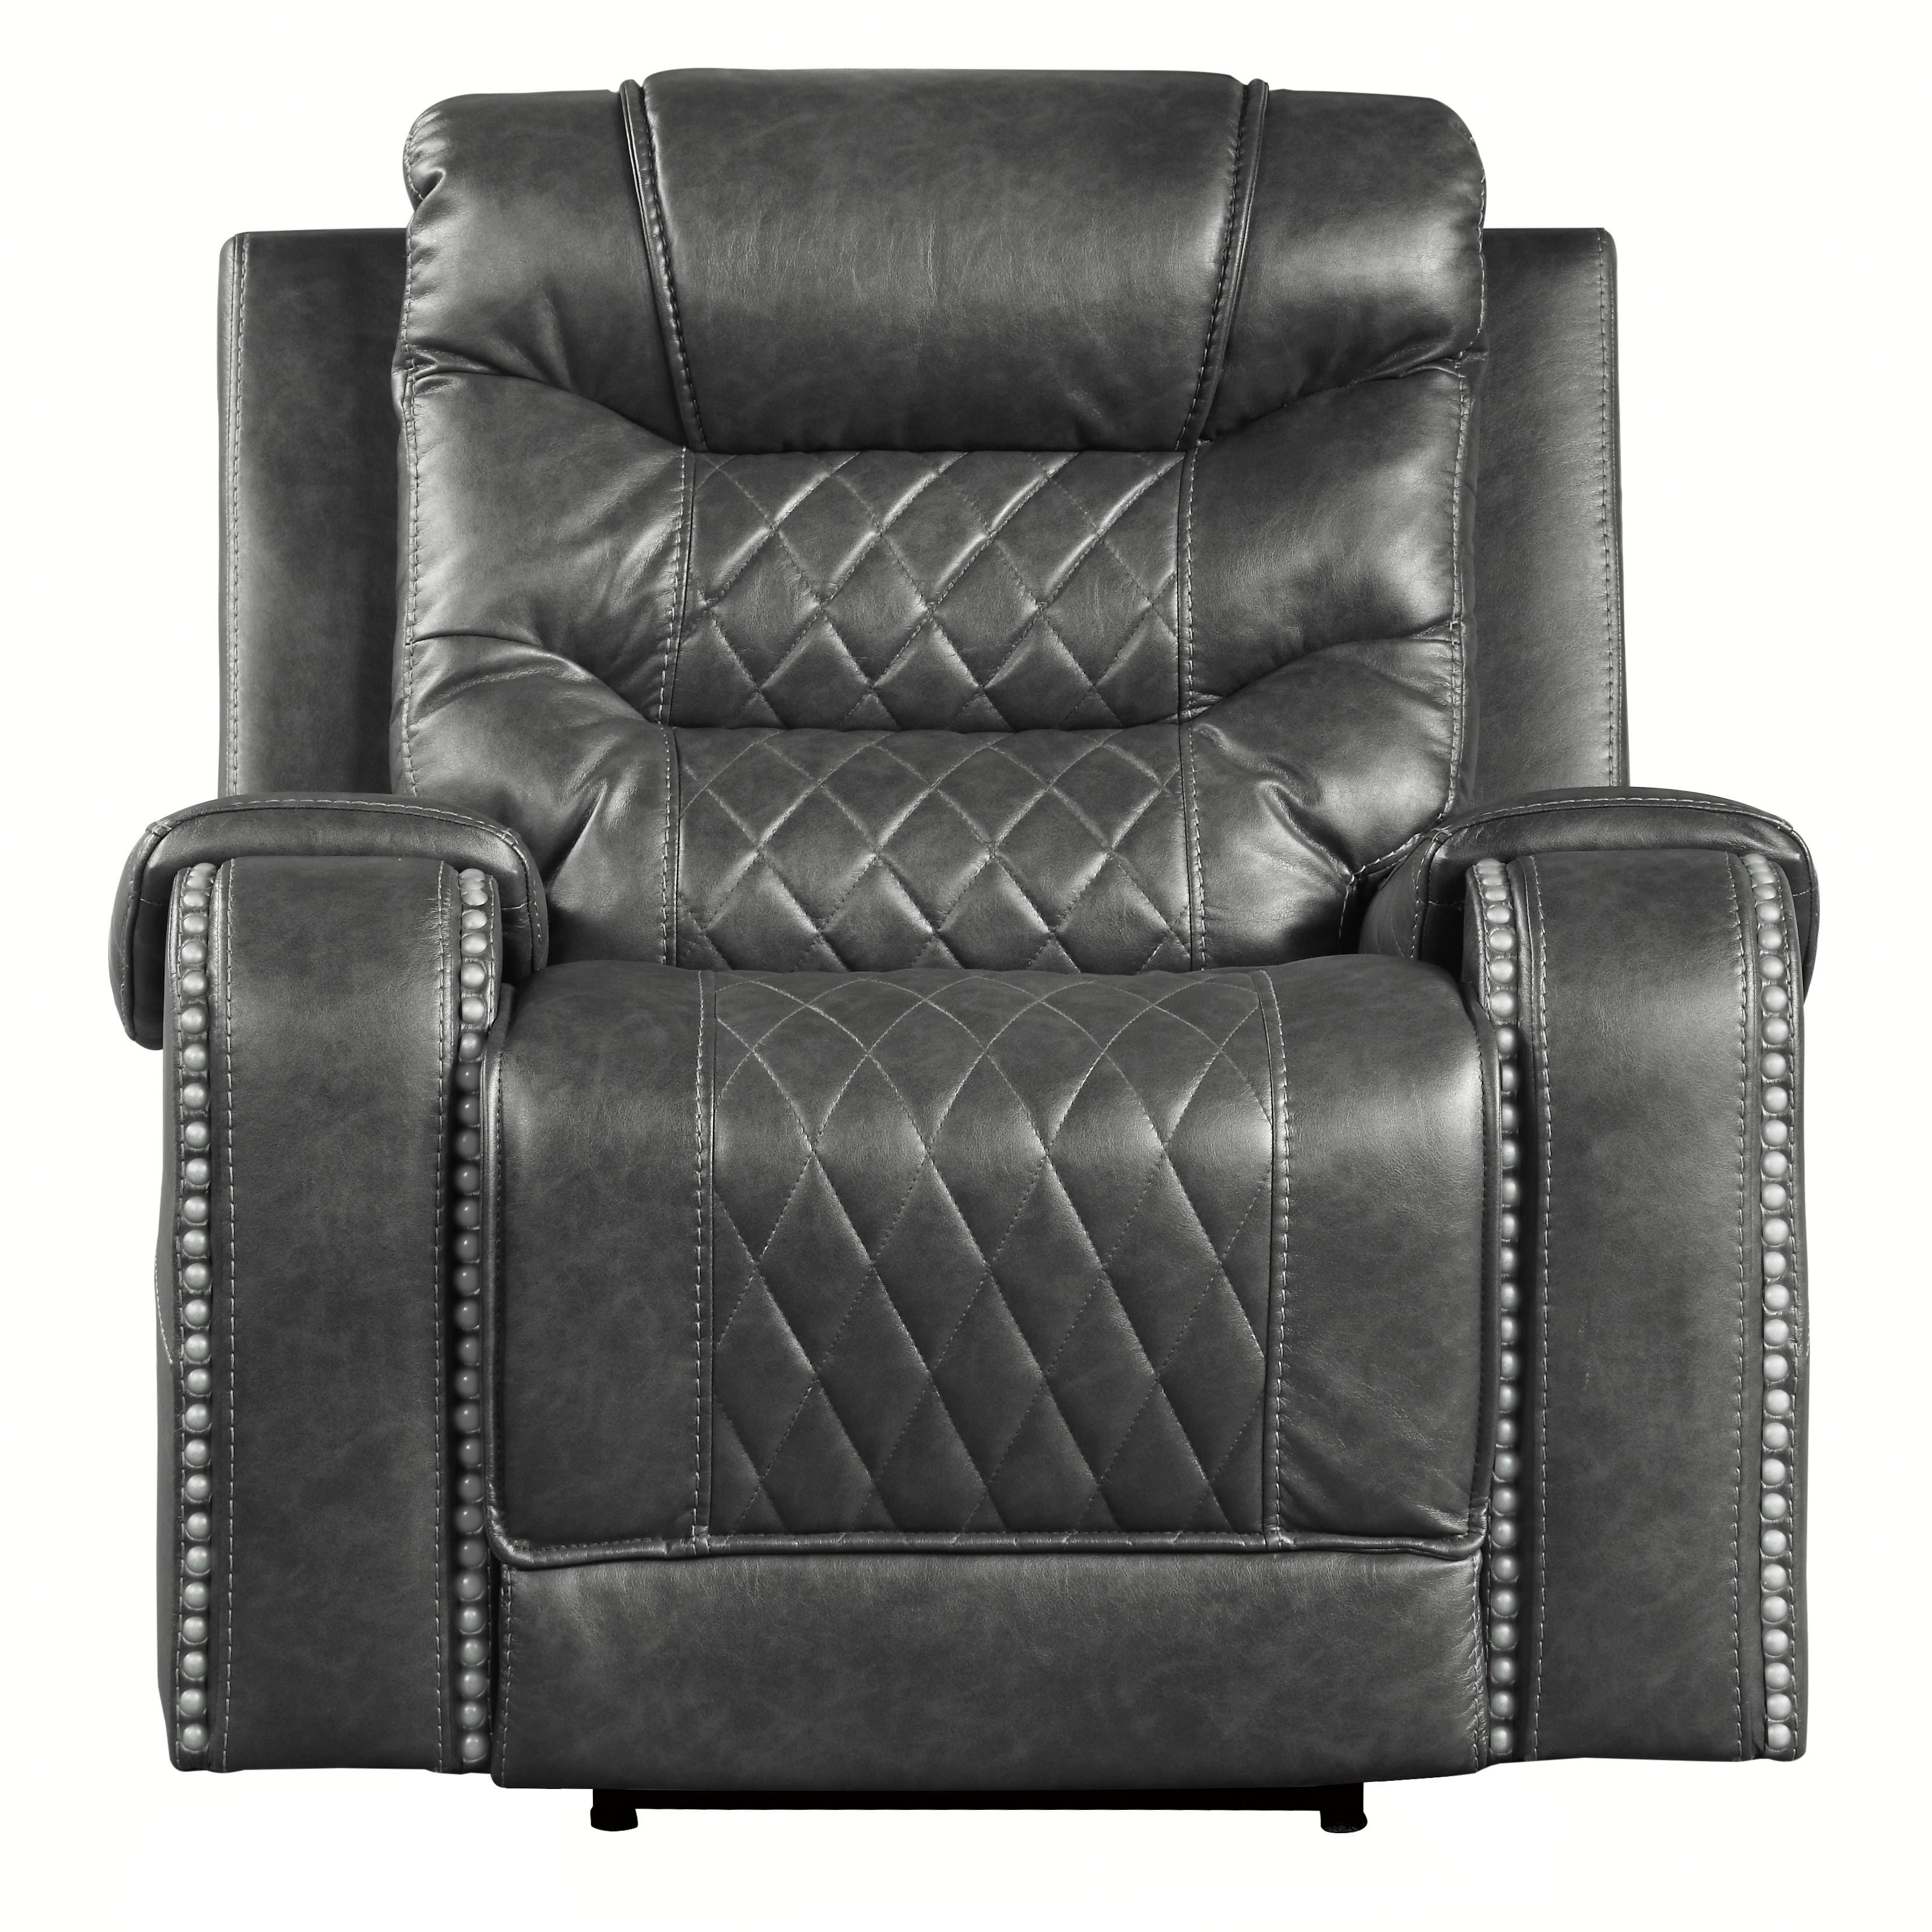 Modern Power Reclining Chair 9405GY-1PW Putnam 9405GY-1PW in Gray Microfiber